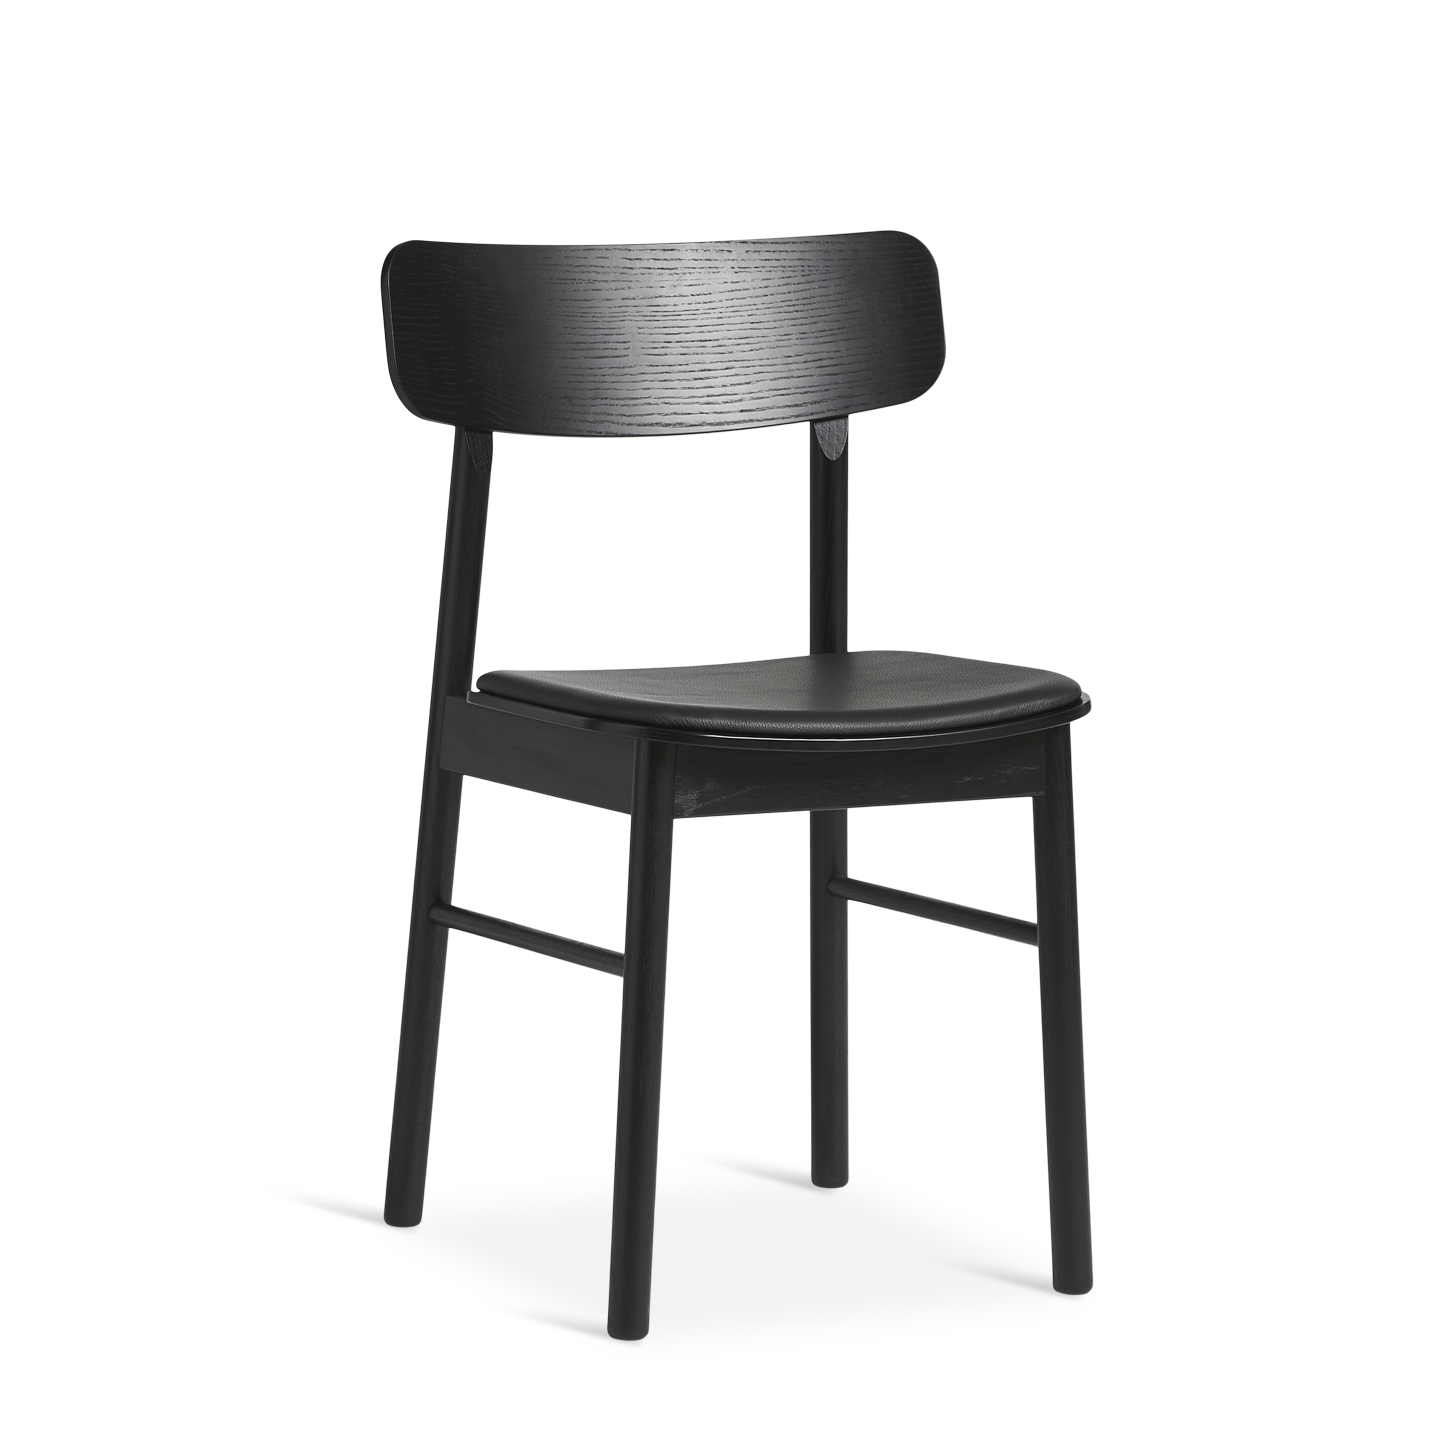 soma dining chair black w/ leather by woud at adorn.house